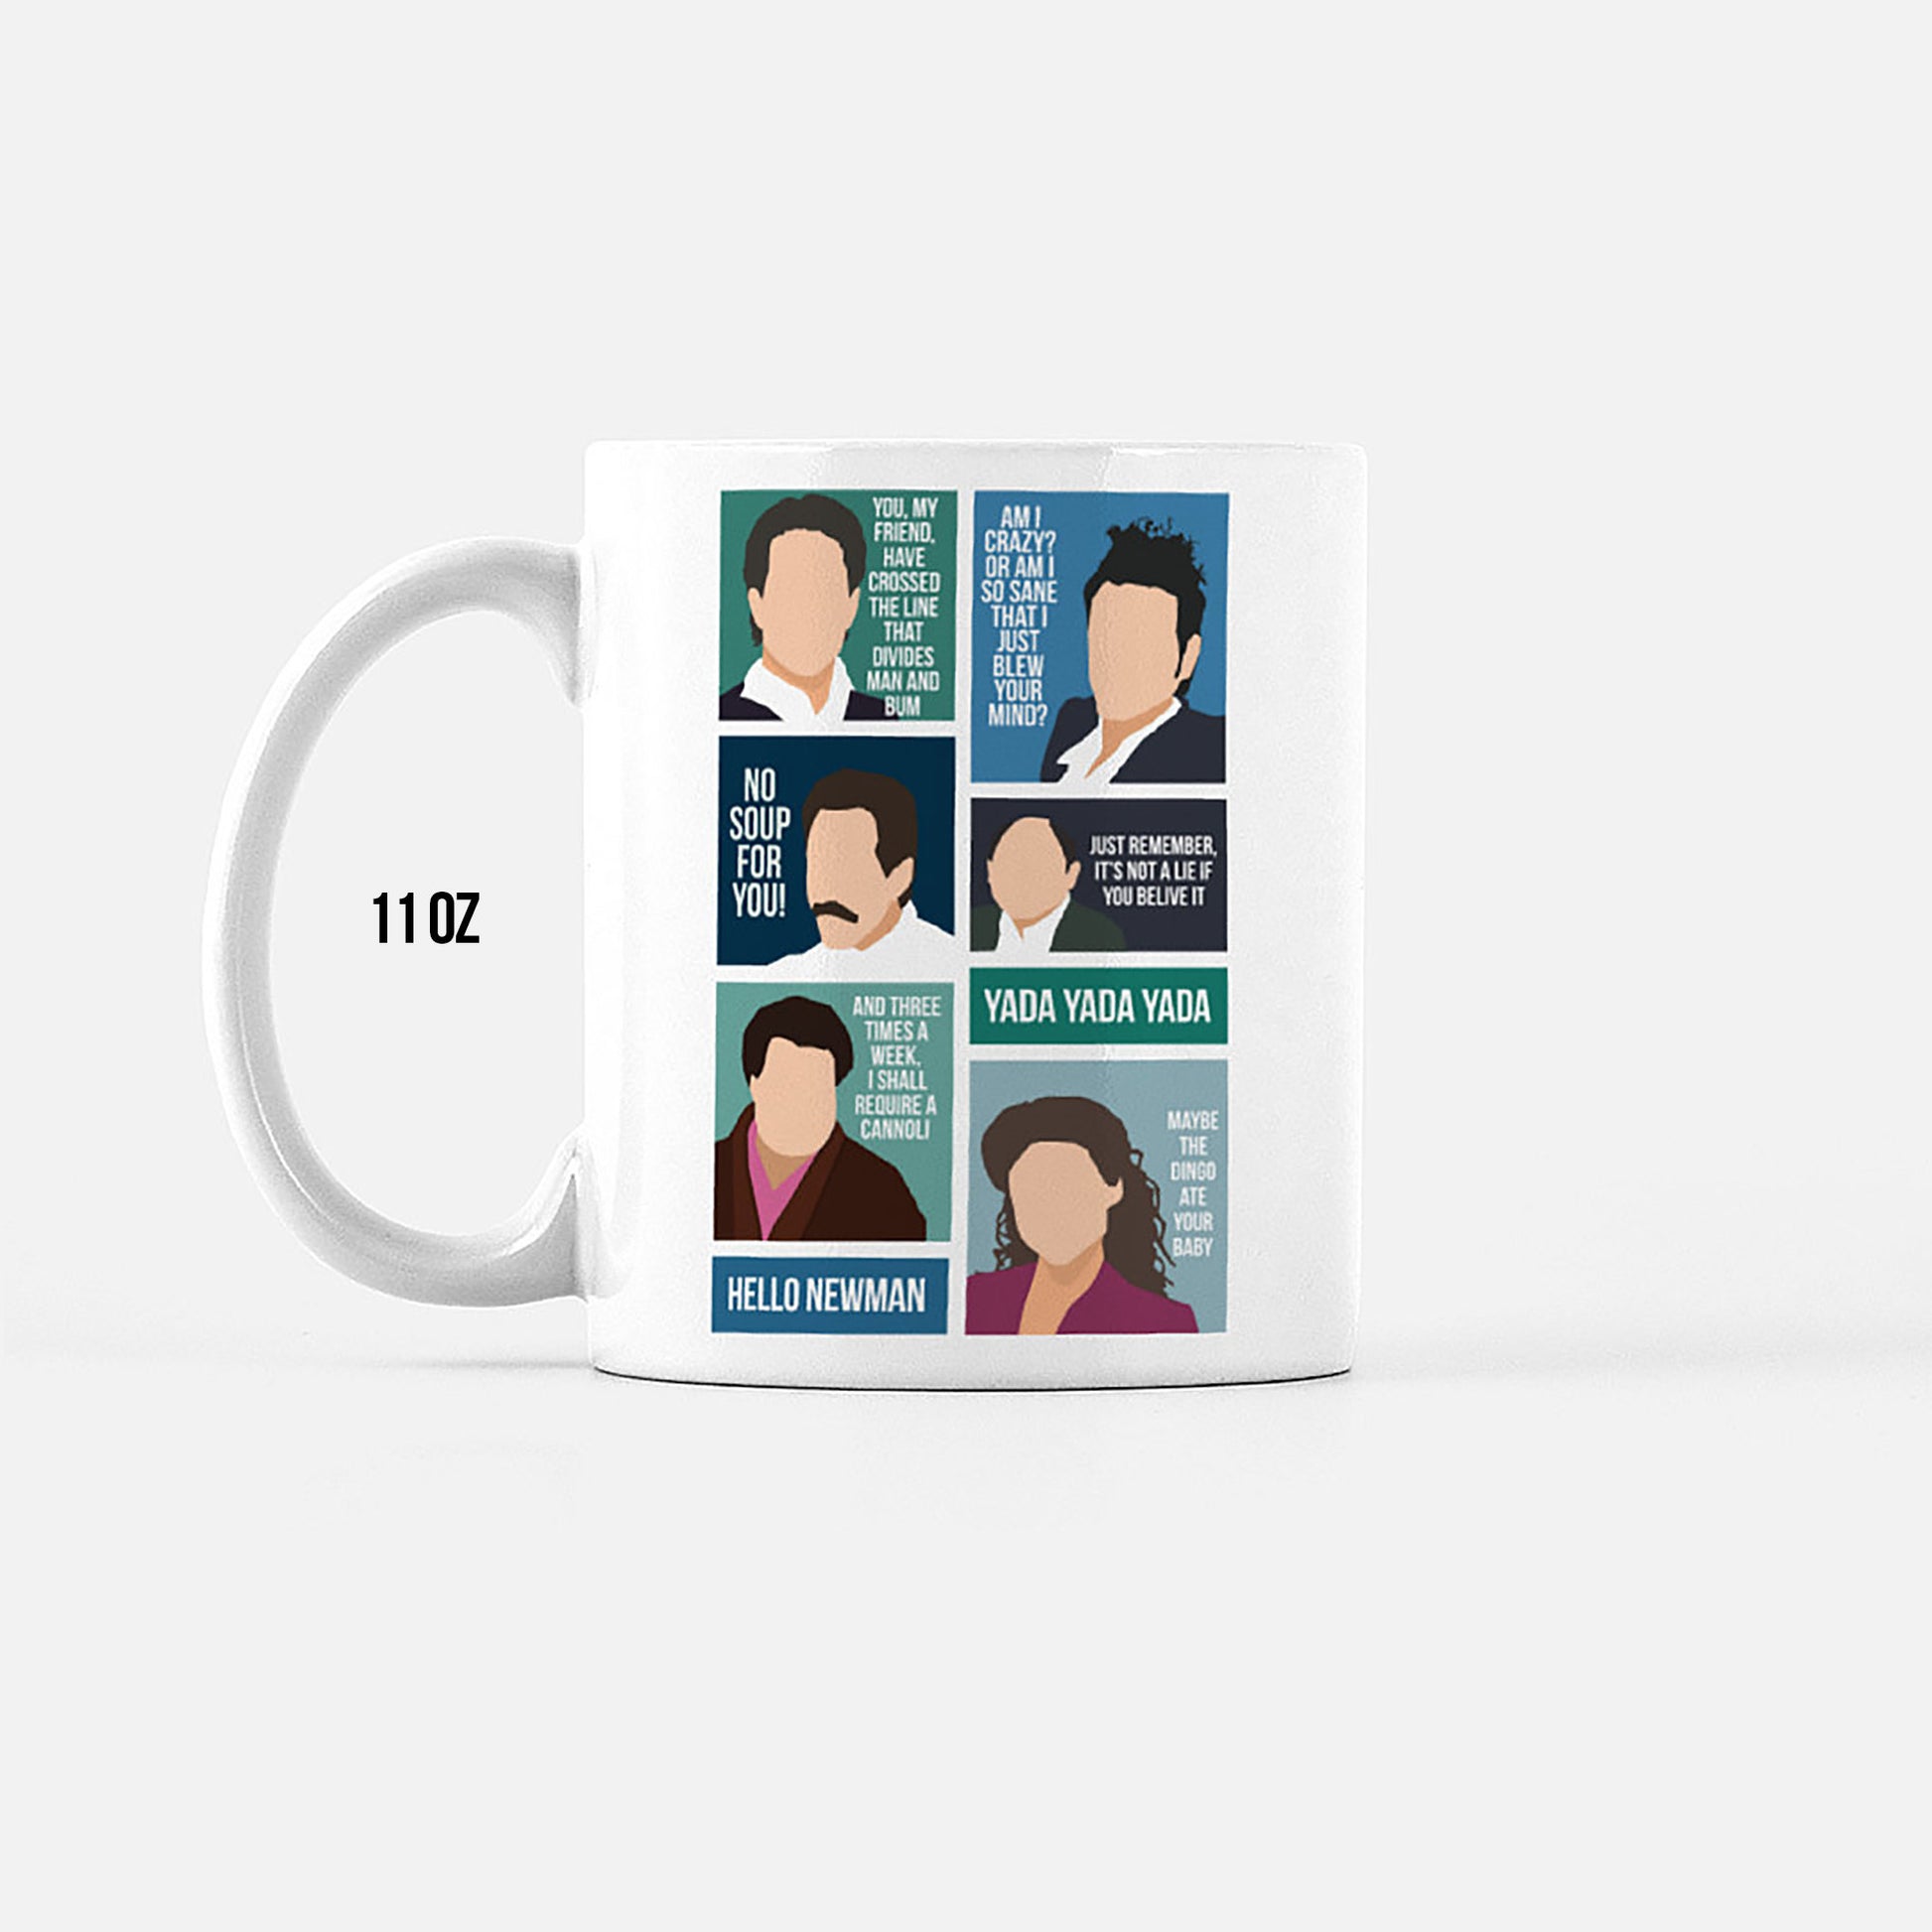 Seinfeld Mug featuring Jerry, Kramer, George, Elaine, Newman, and Quotes